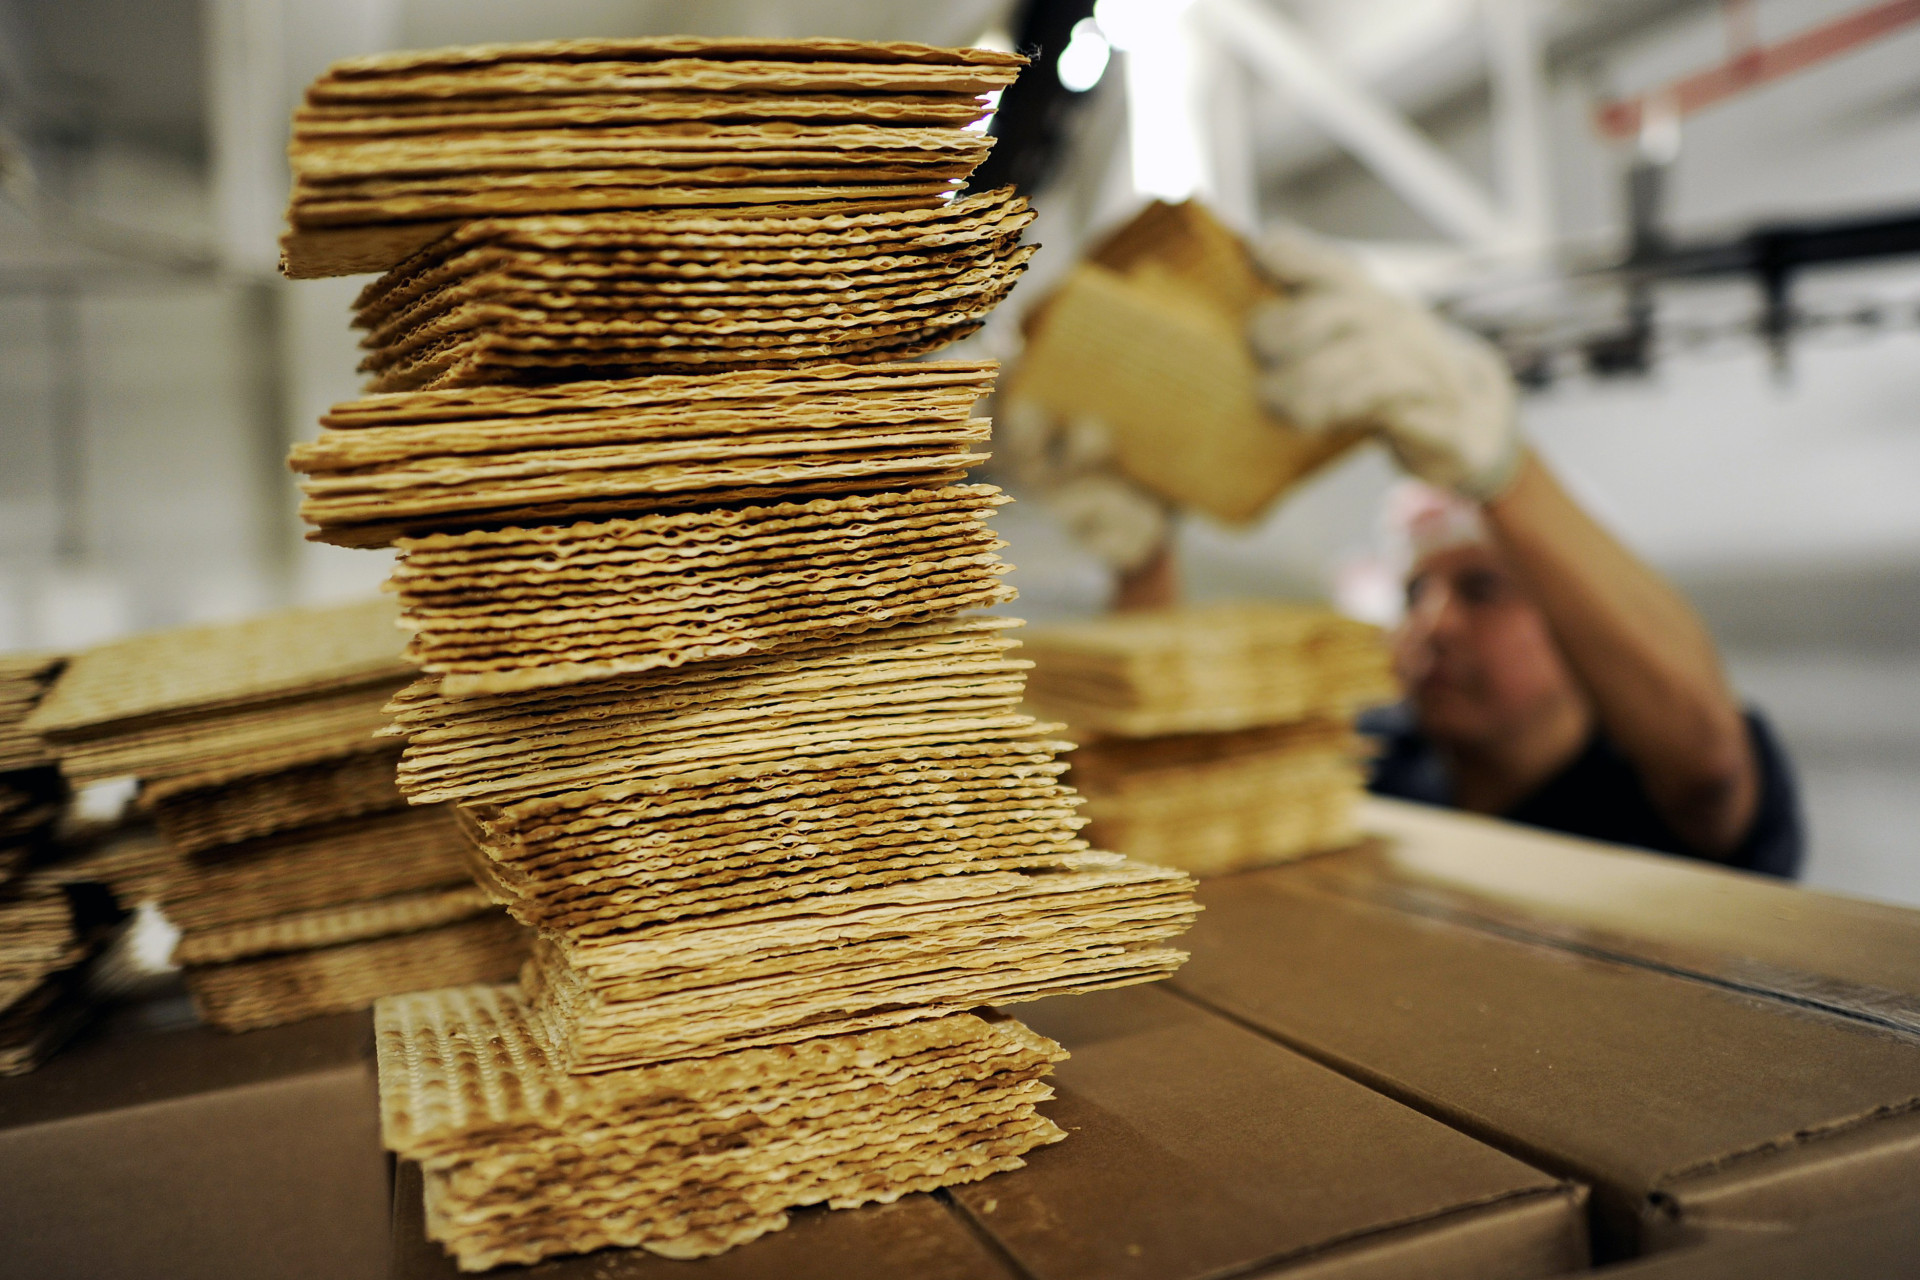 A worker stacks matzo wafers at Streit's matzo factory on the Lower East Side of New York, May 2012.